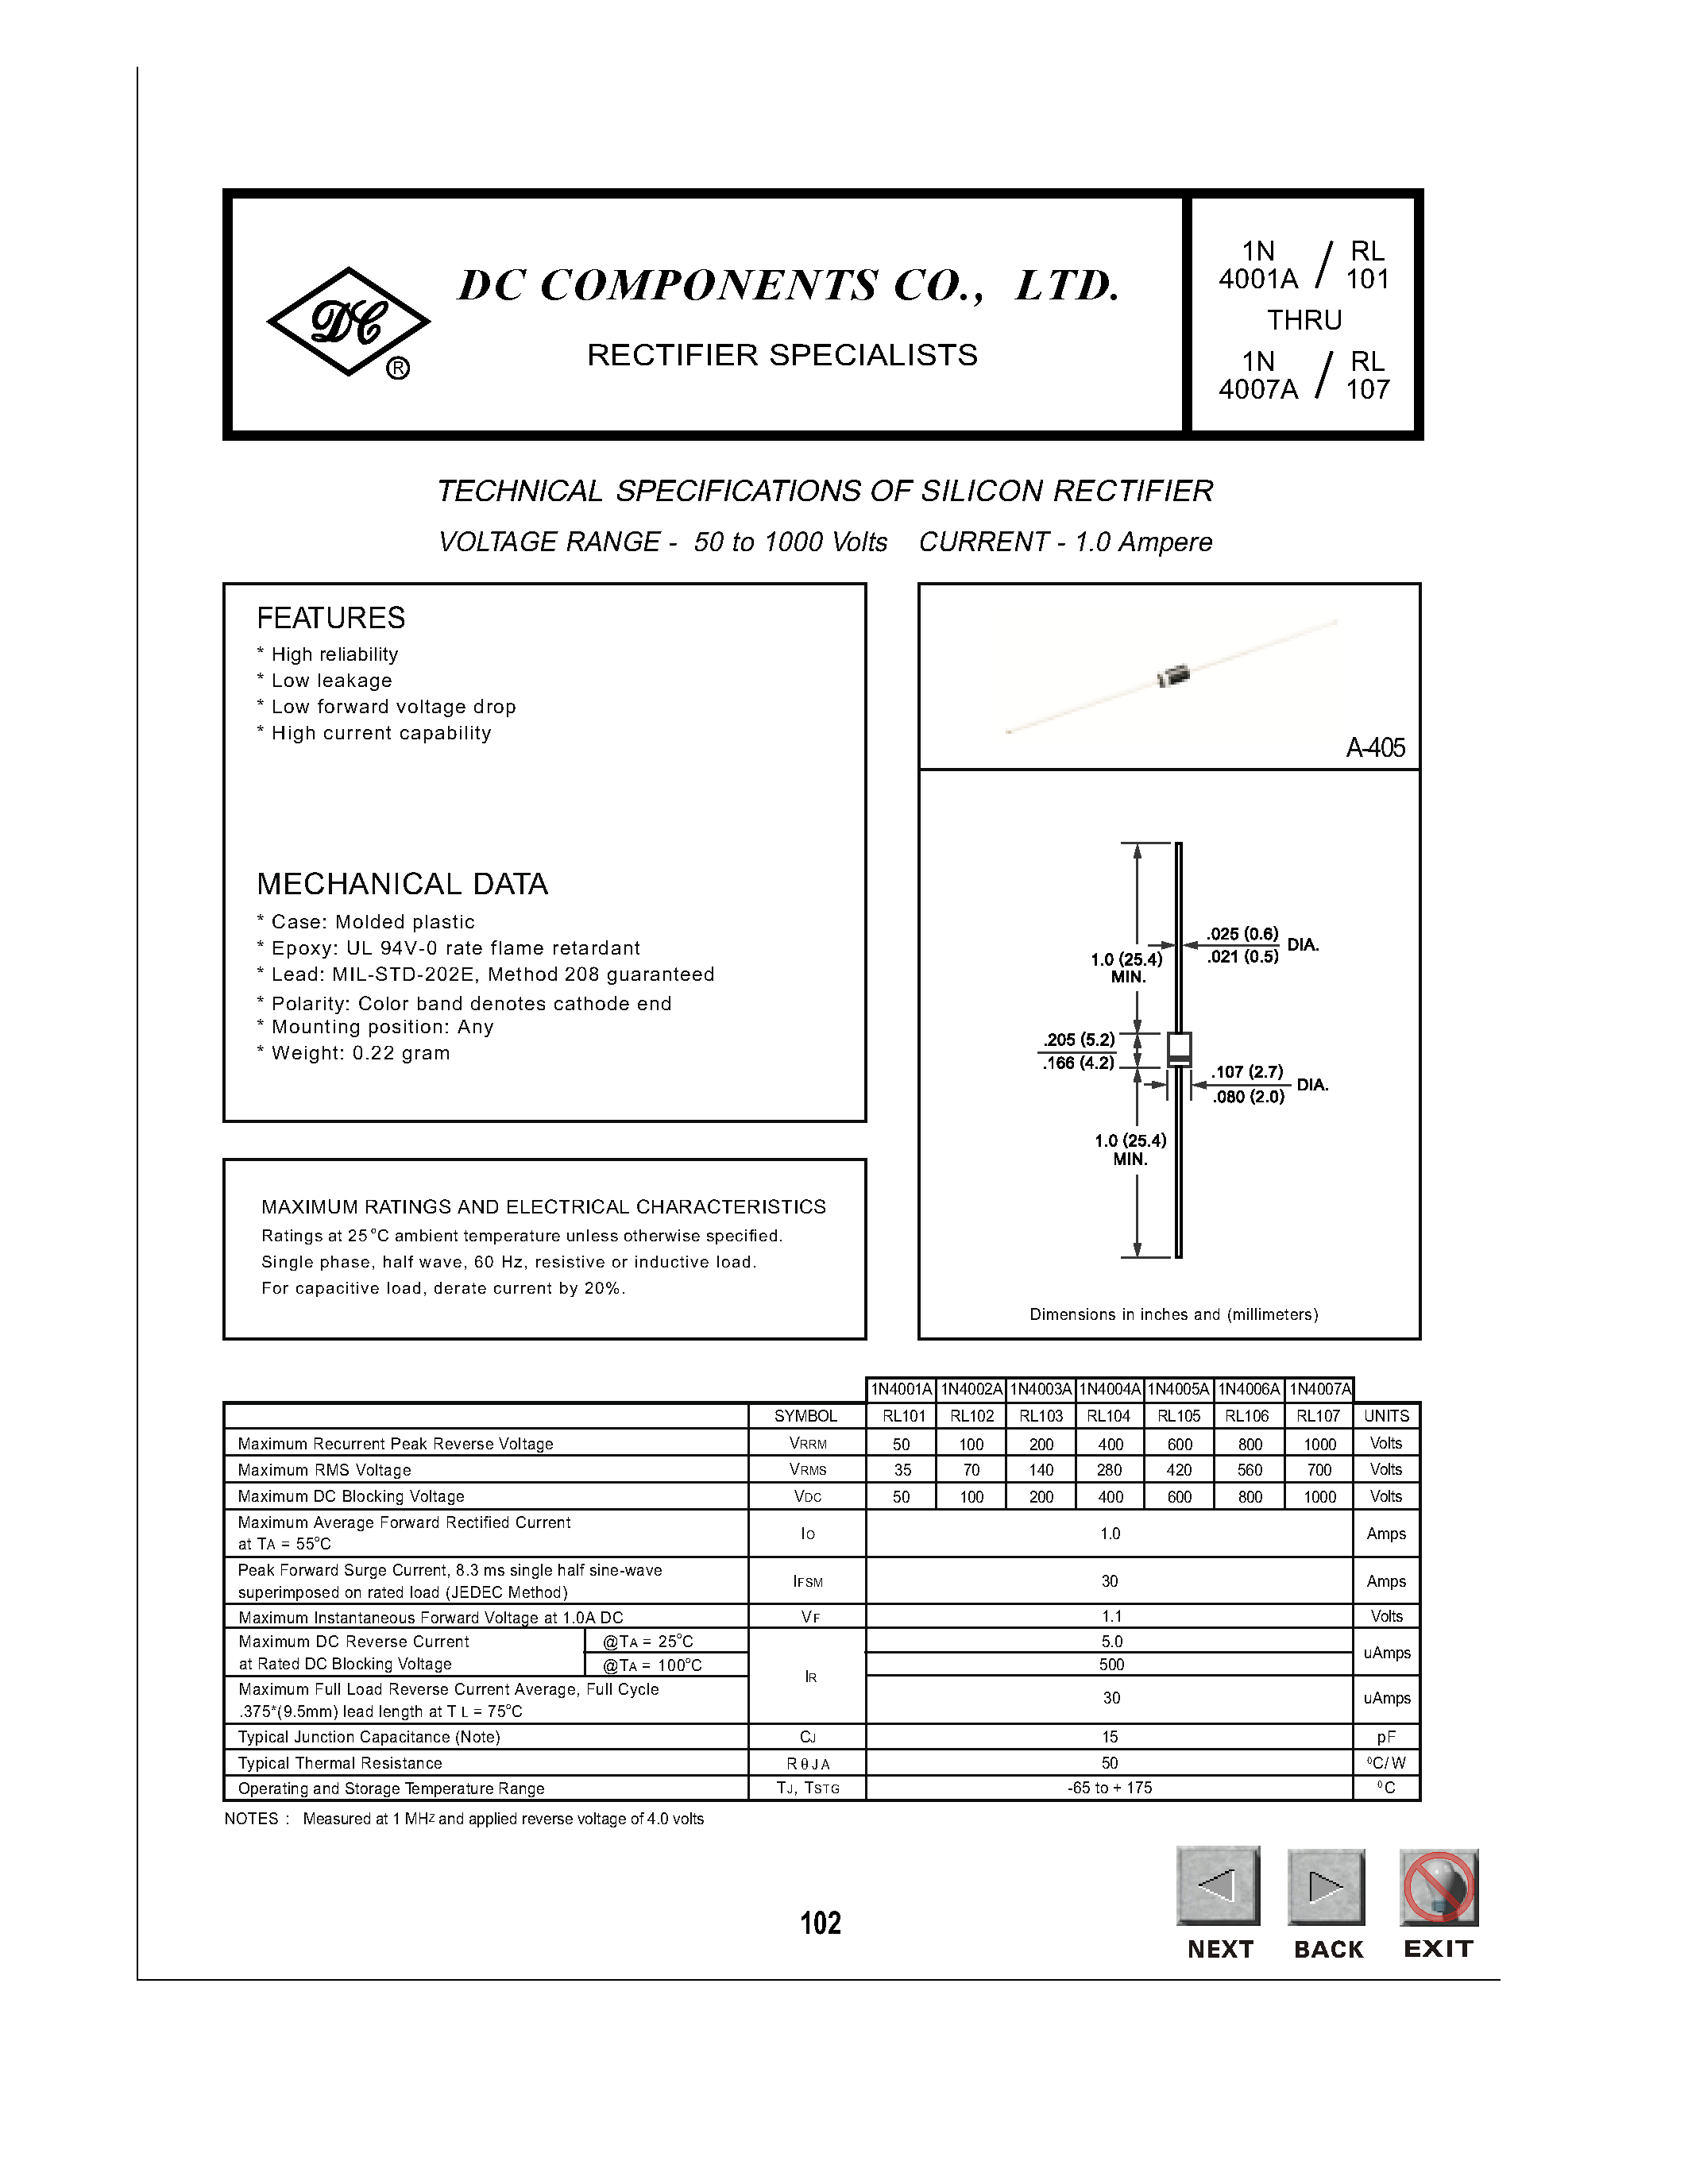 Даташит 1N4001A - (1N4001A - 1N4007A) TECHNICAL SPECIFICATIONS OF SILICON RECTIFIER страница 1